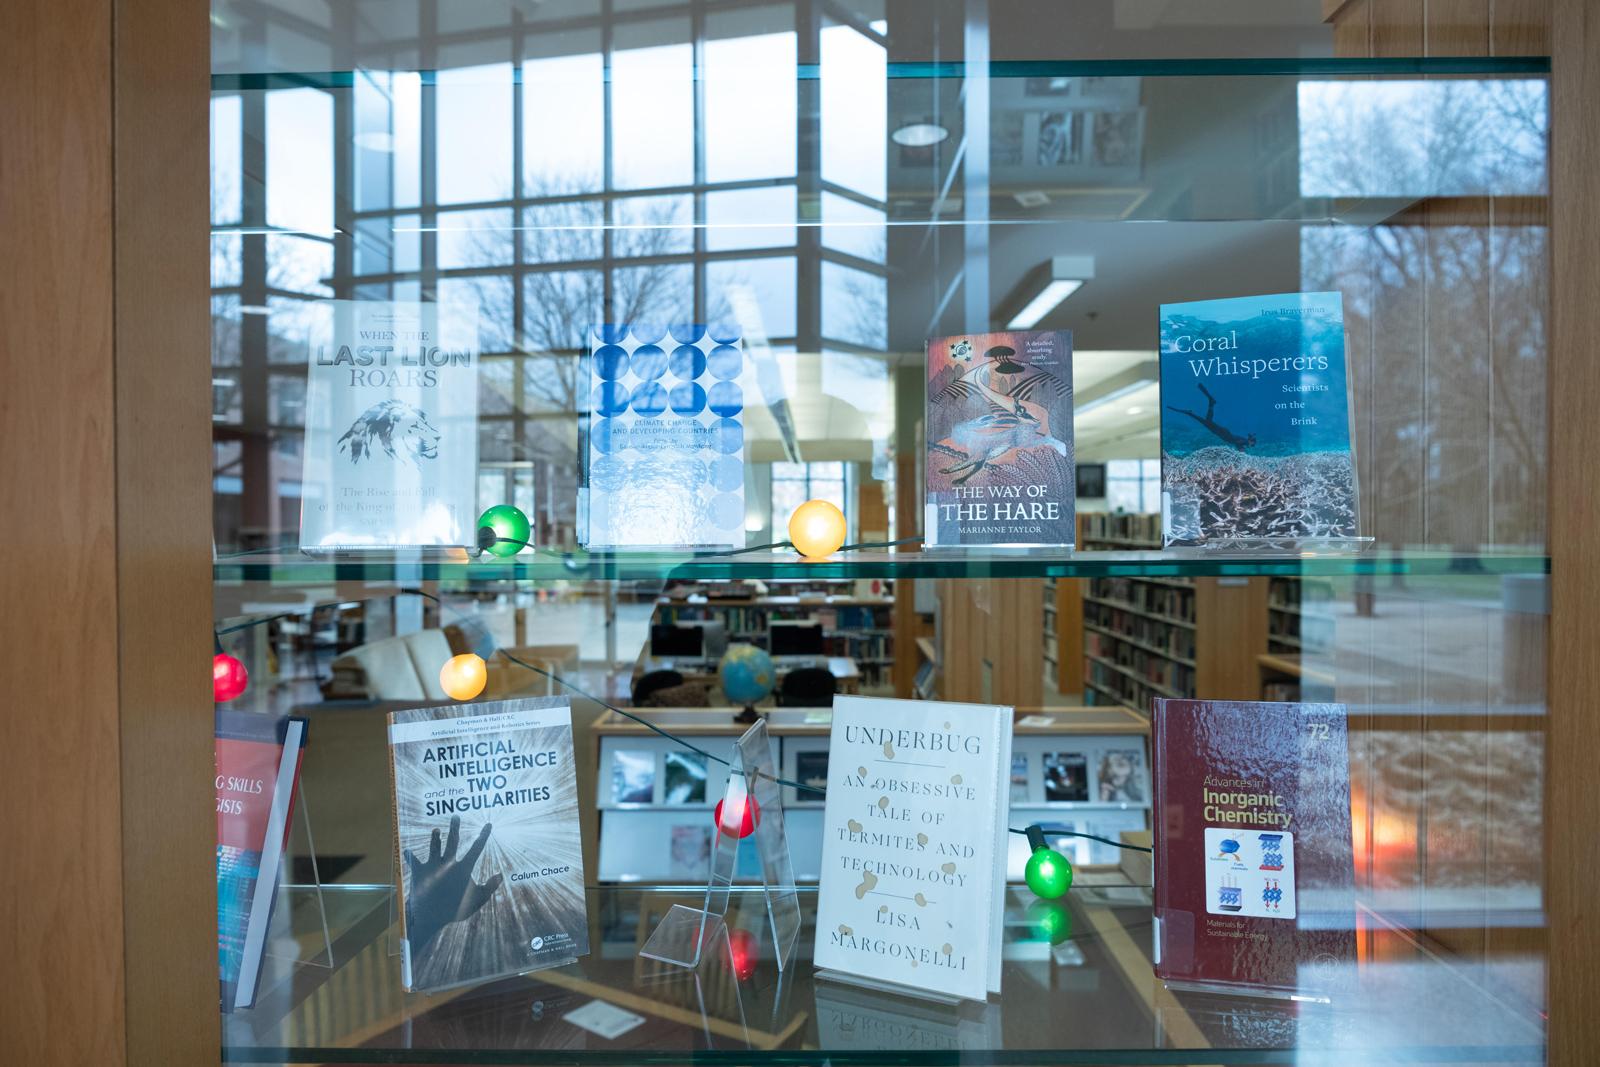 Books are displayed in a glass case in a modern library.